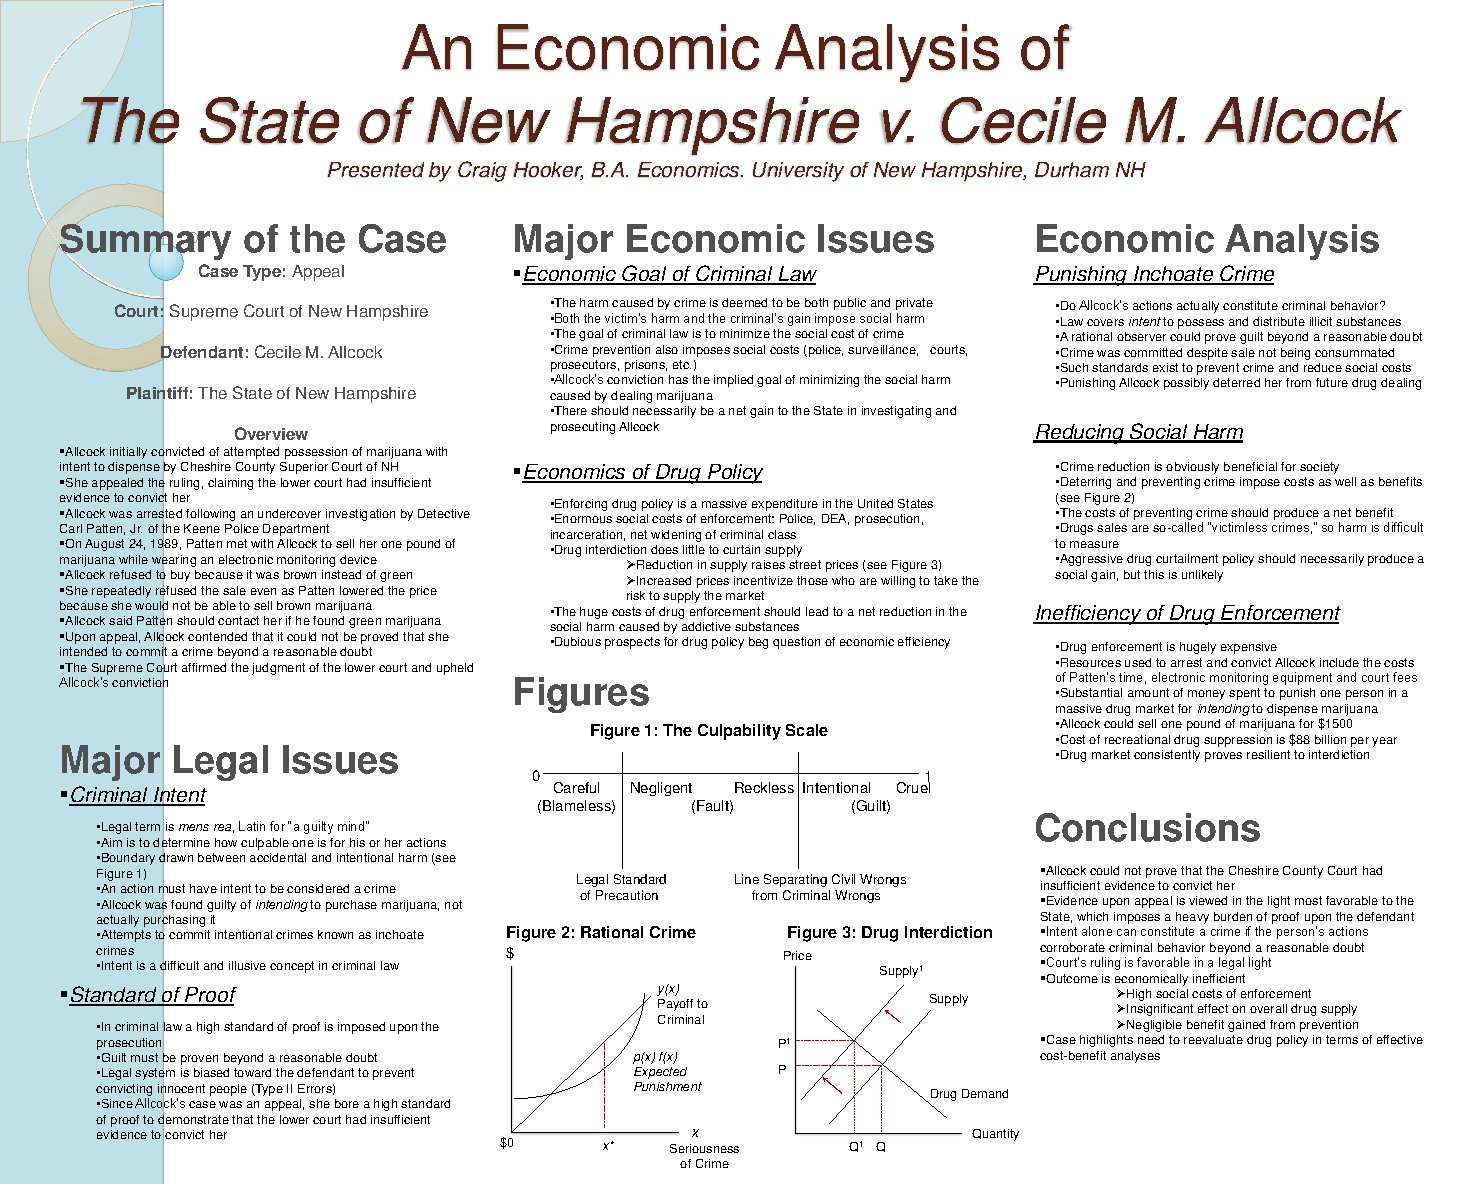 An Economic Analysis Of Cecile Allcock V. The State Of New Hampshire by clv56